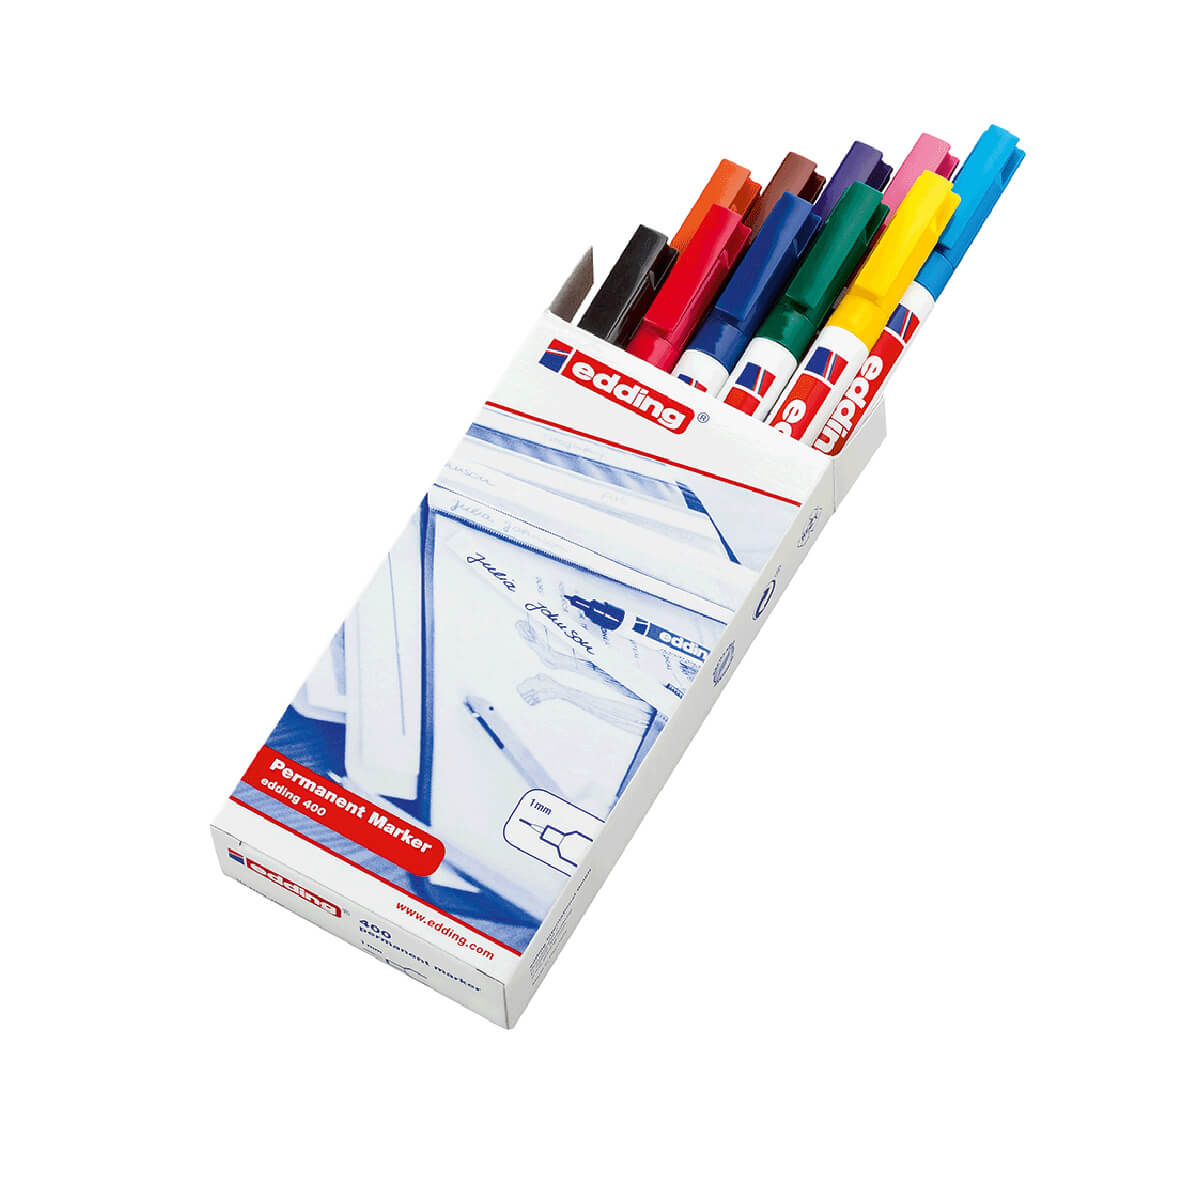 edding Permanent marker 400, refillable, 1 mm 10 colors - Assorted